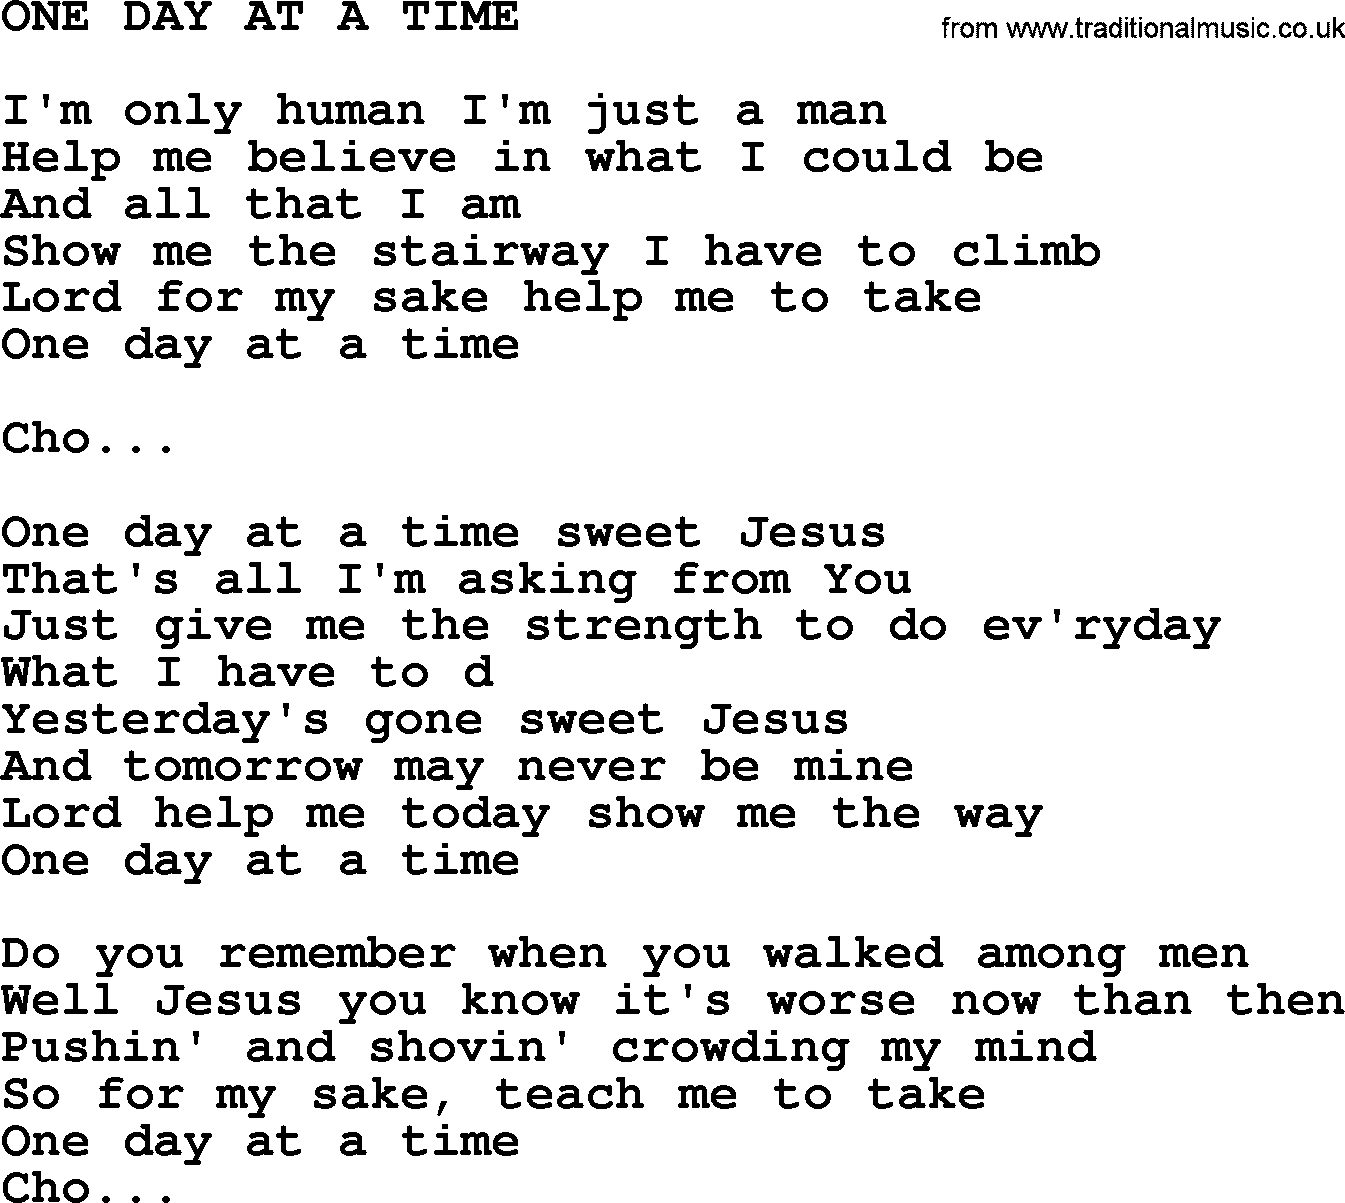 Kris Kristofferson song: One Day At A Time lyrics